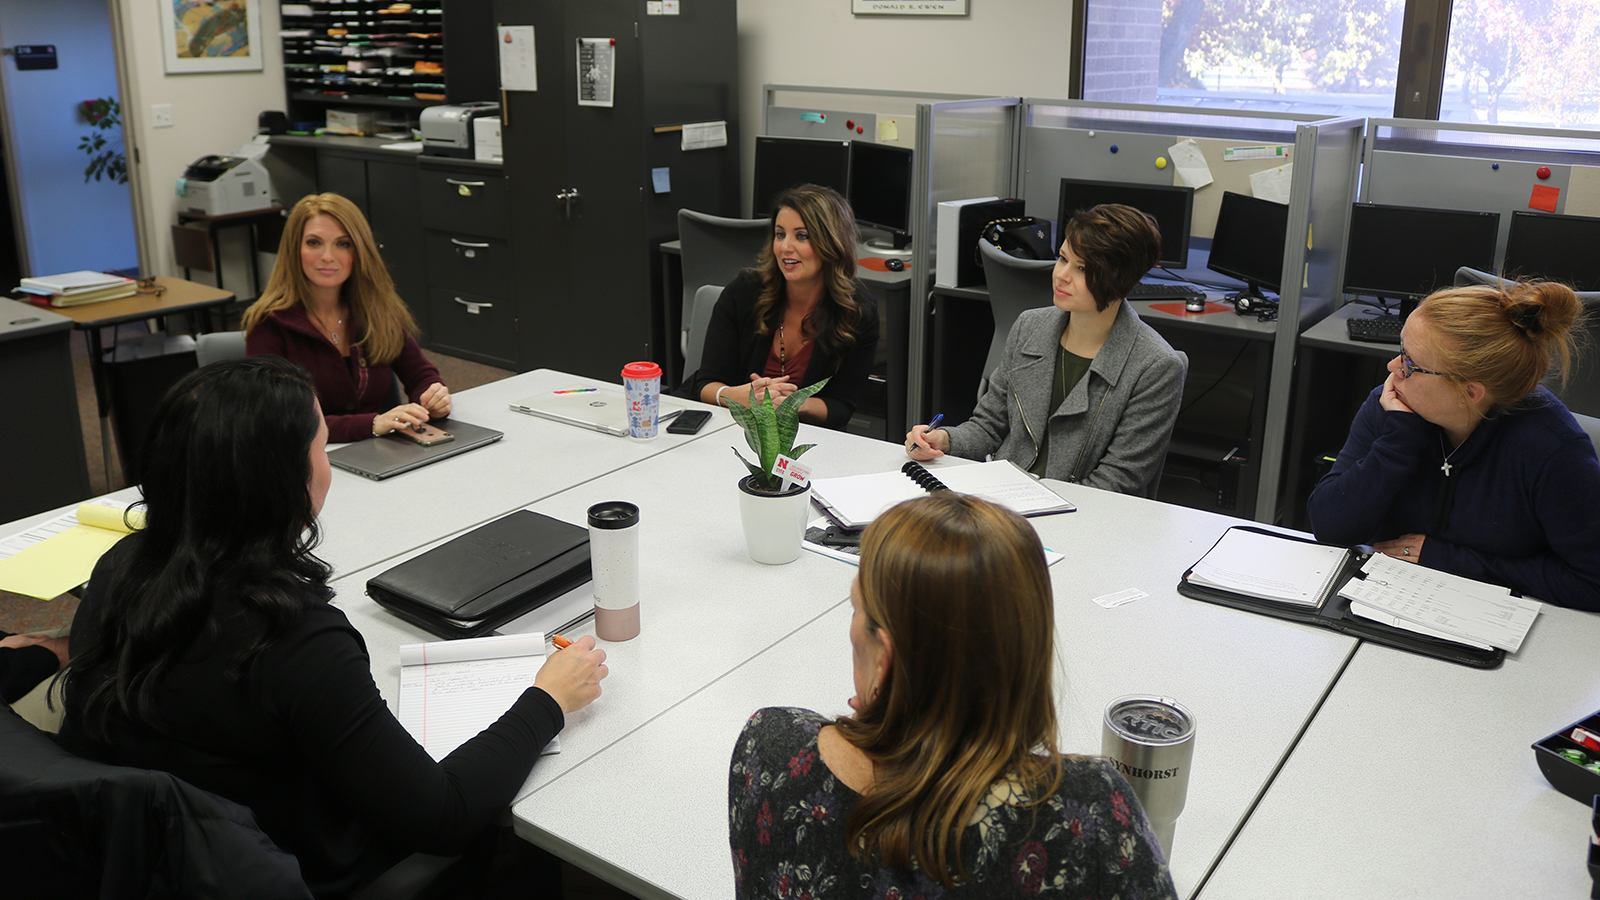 Individuals from the Academy for Child and Family Well Being, and KVC Nebraska discuss their collaboration for the Fostering Educational Success project during a planning meeting.